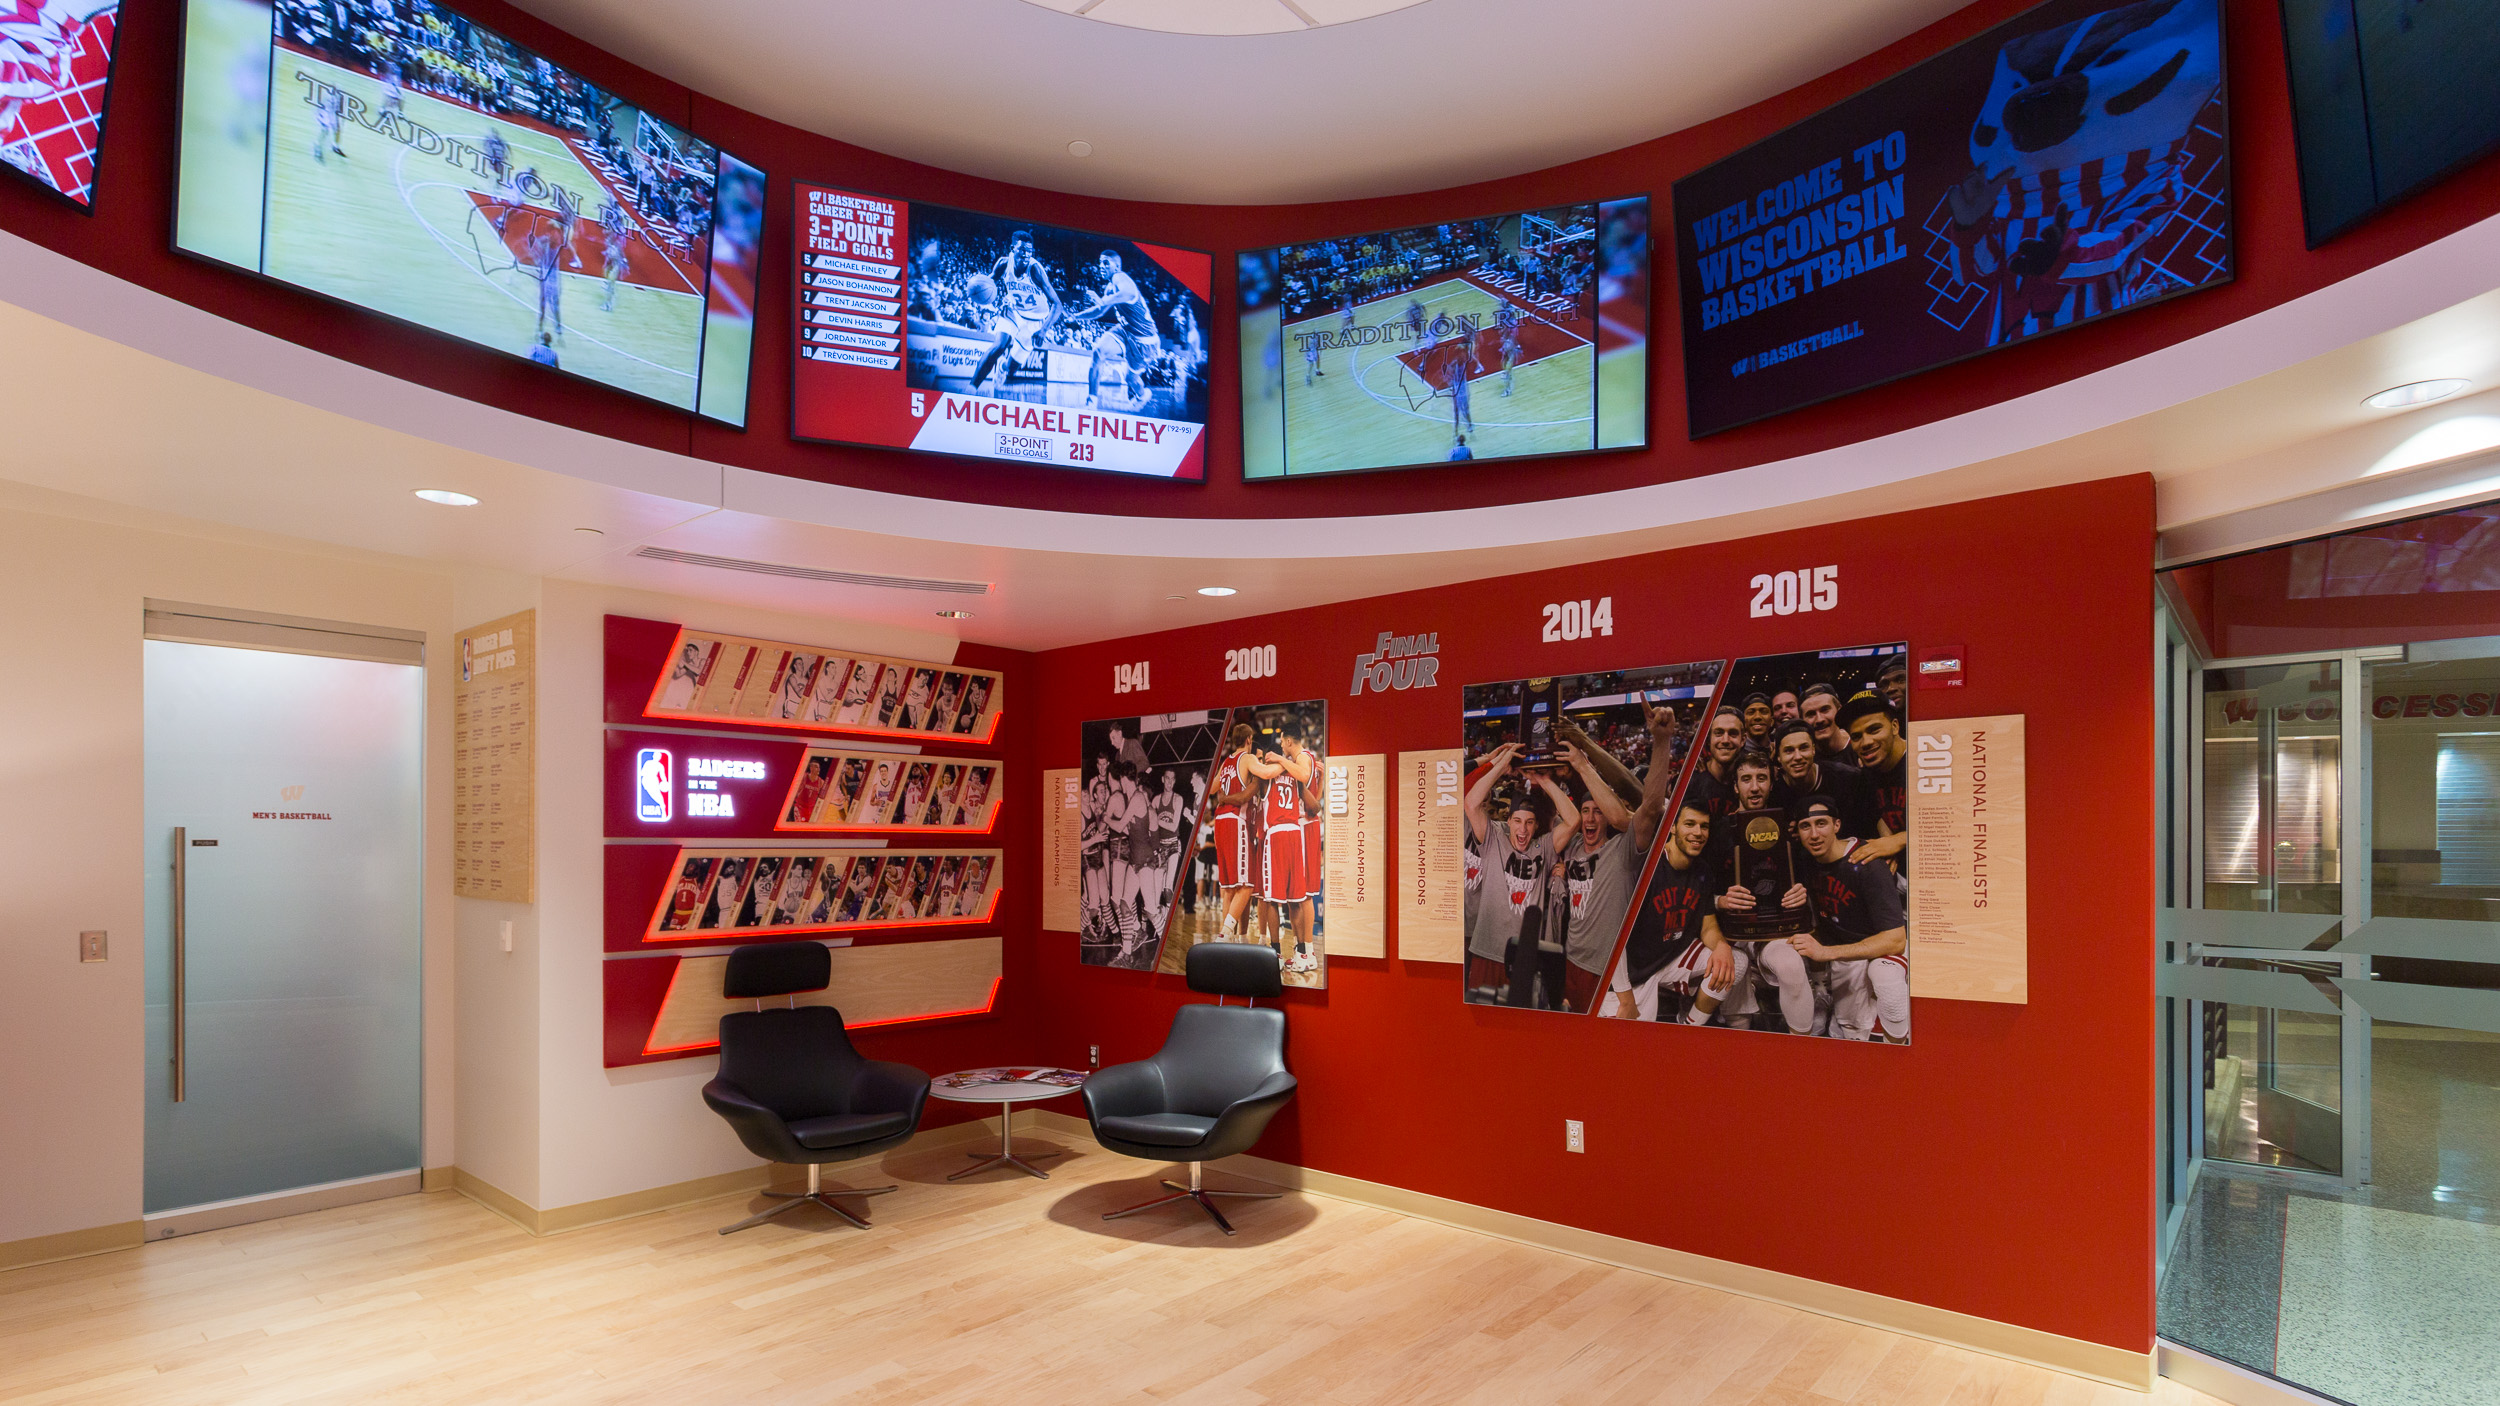 University of Wisconsin - Basketball Offices Facility Branding